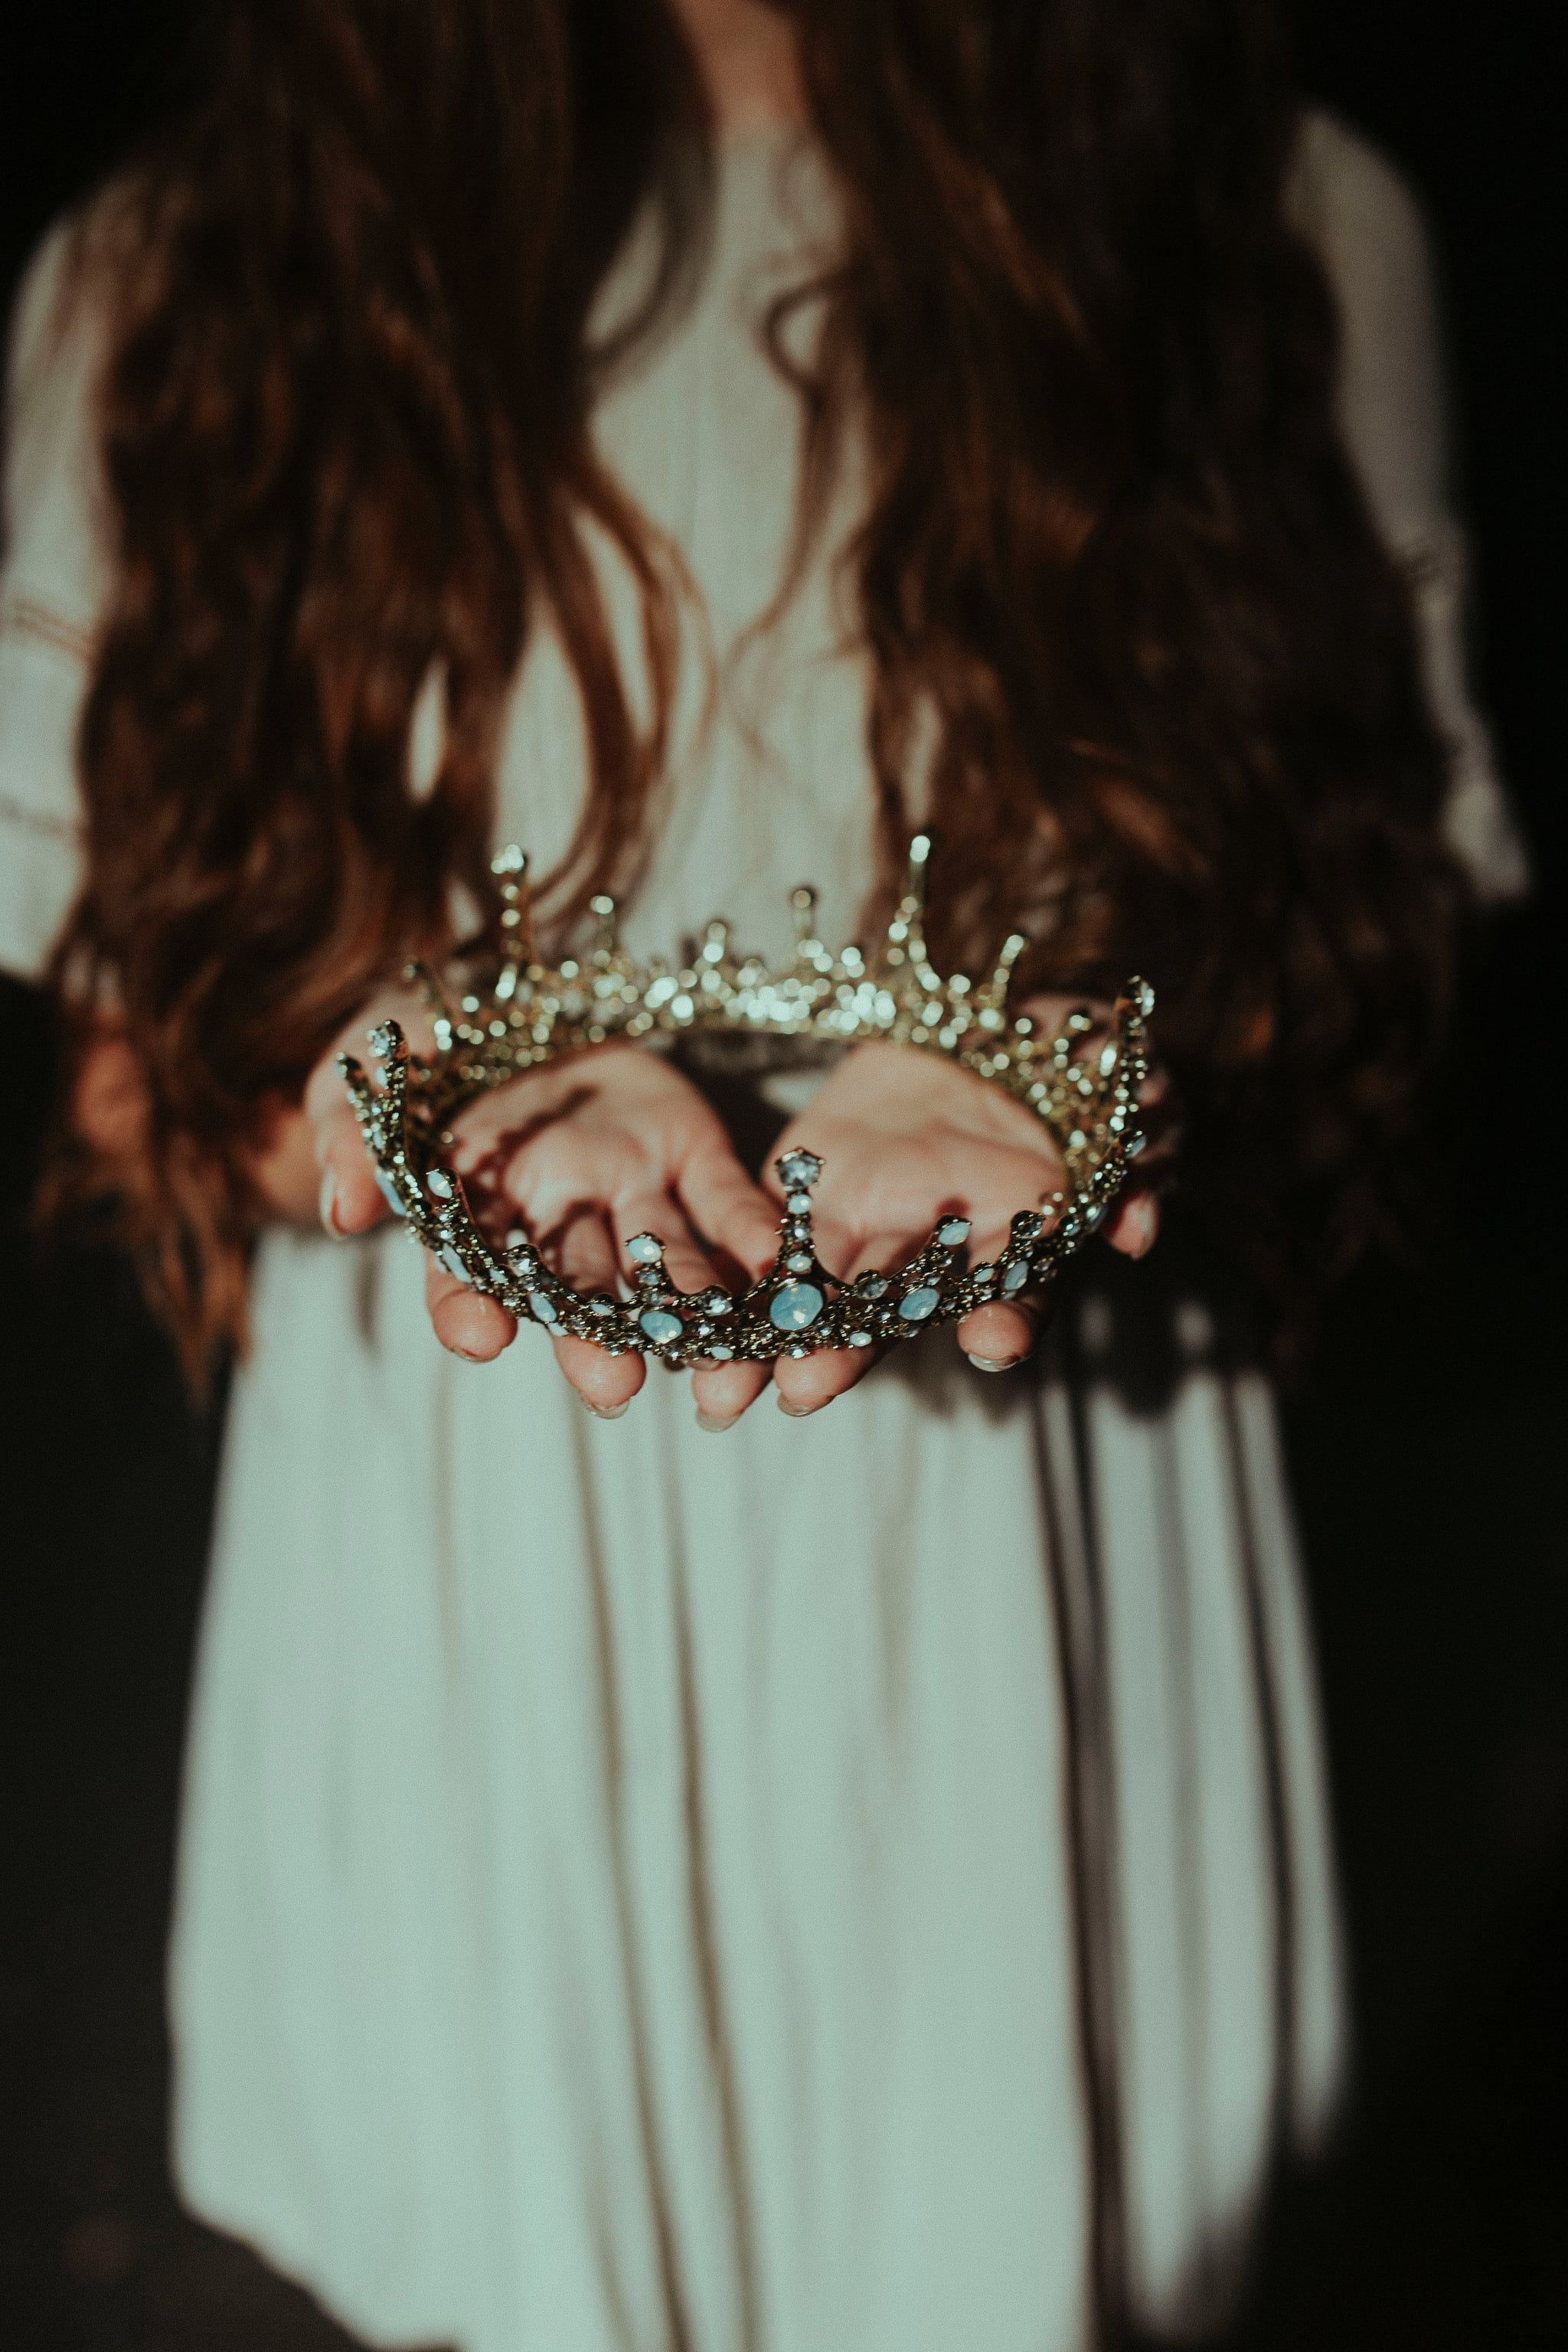 A woman with long brown hair holding a silver crown. - Crown, royalcore